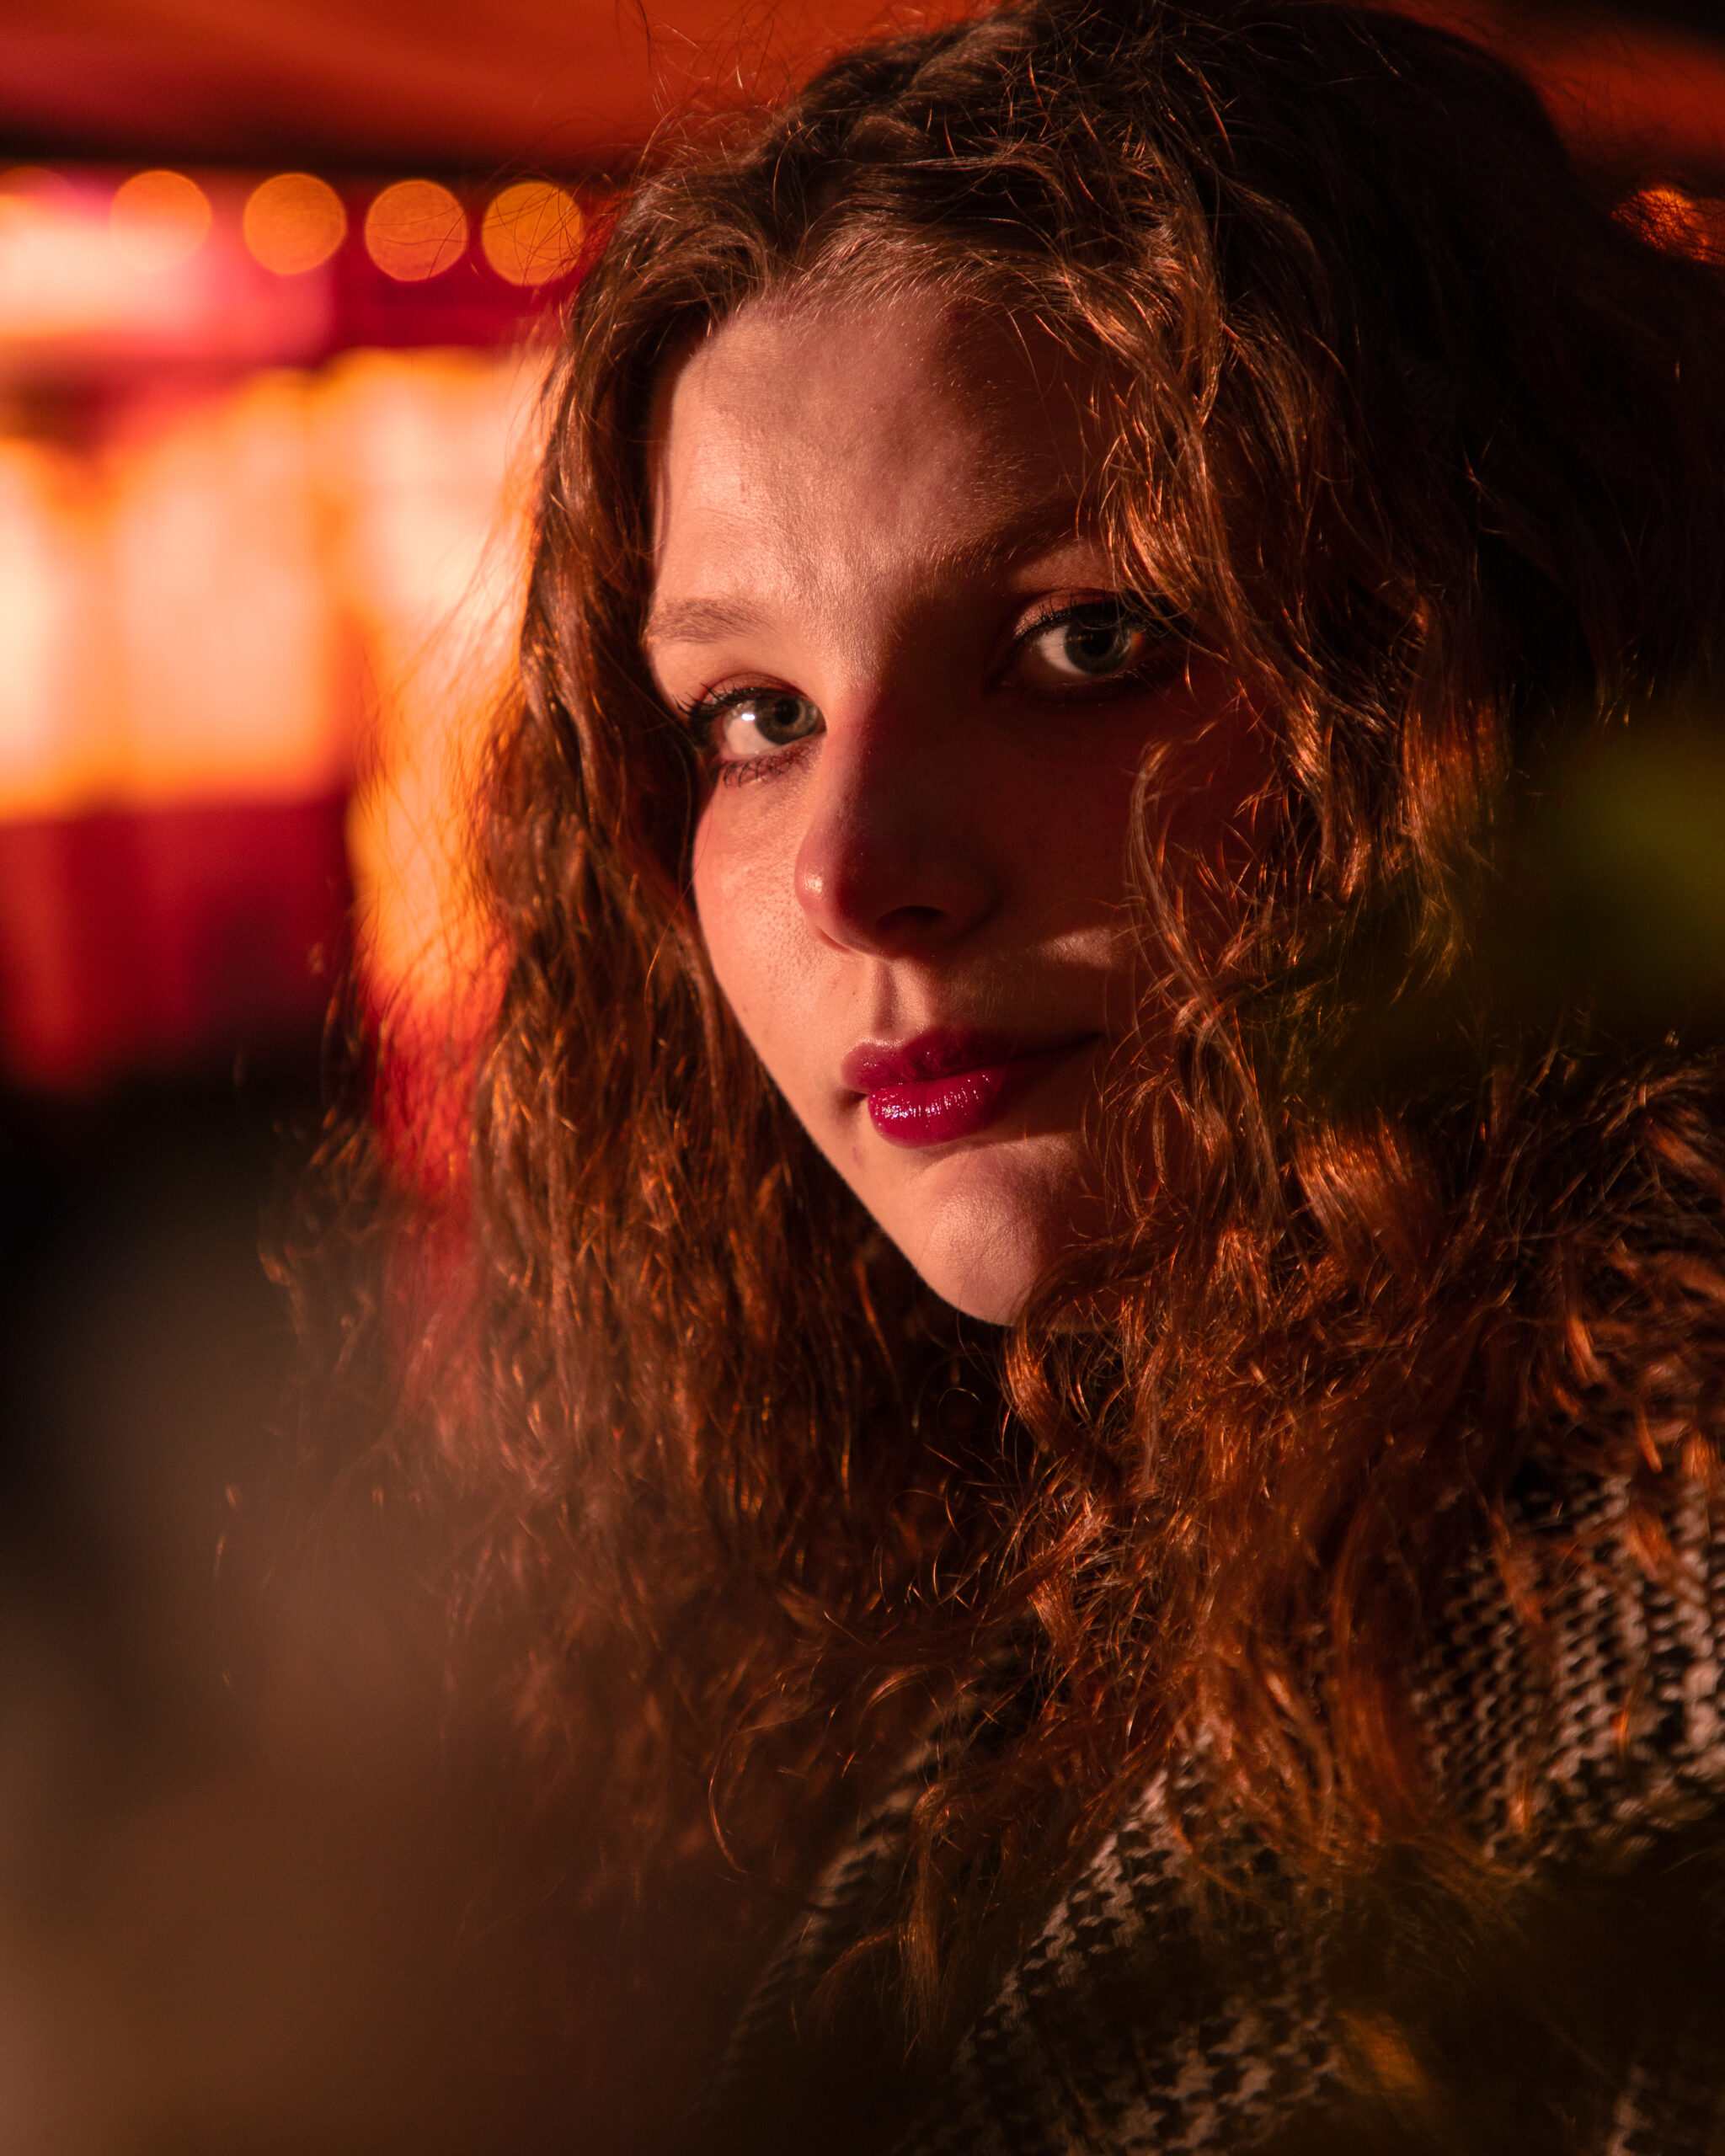 The photo shows a close-up of a woman with curly hair, looking directly at the camera. She has pinkish-red lipstick on, and the lighting casts a warm glow on her face, accentuating her features. In the background, out-of-focus lights create a bokeh effect, contributing to a warm ambiance. The woman is wearing a patterned garment, although it's not fully visible. The overall tone of the photo is warm, with a focus on the woman's face and expression.